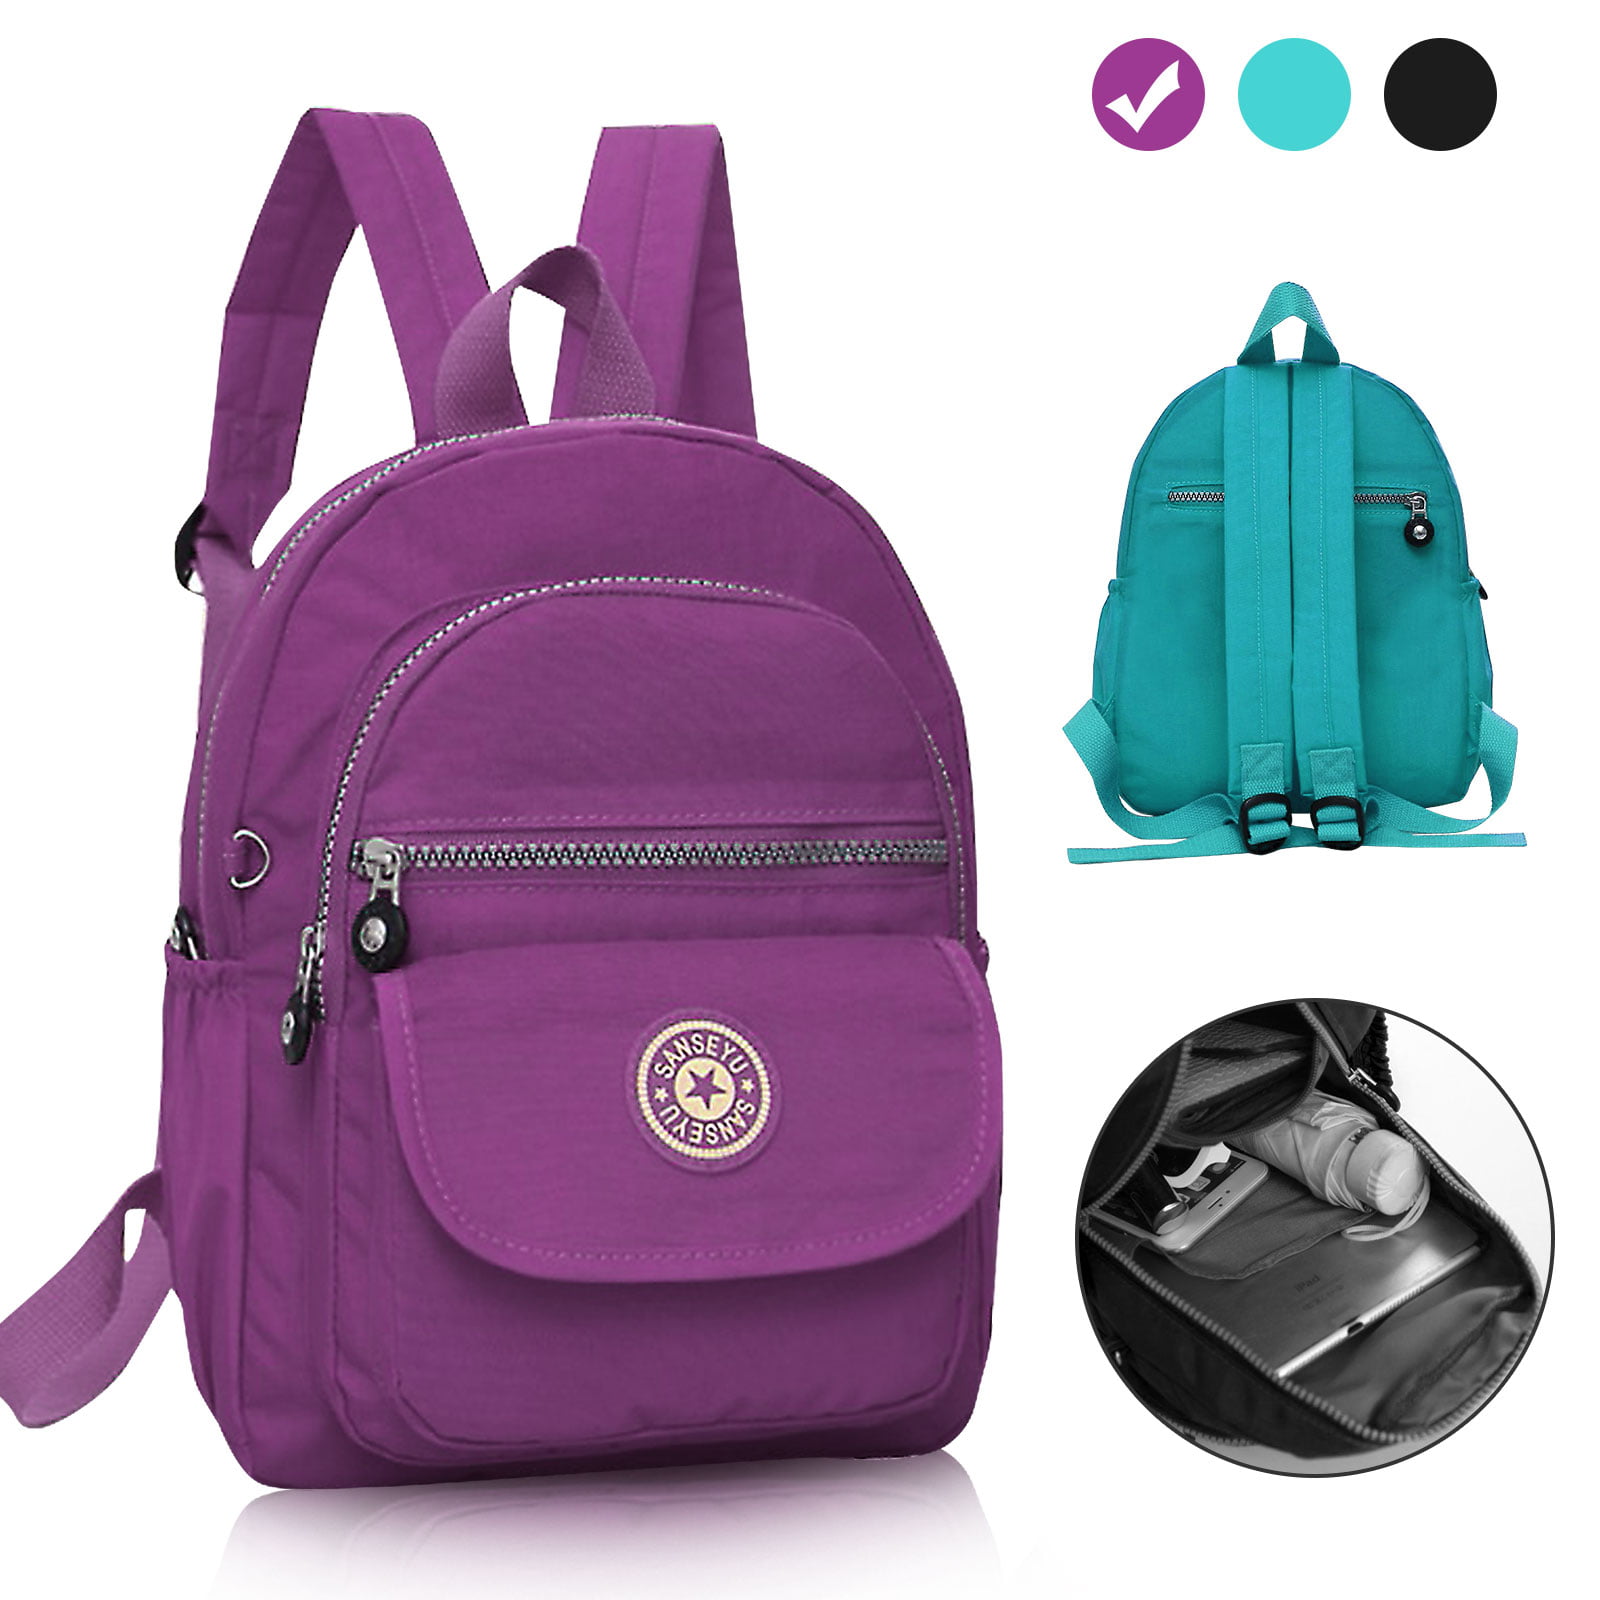 Best Small Travel Backpack - 20 collection of ideas about how to make